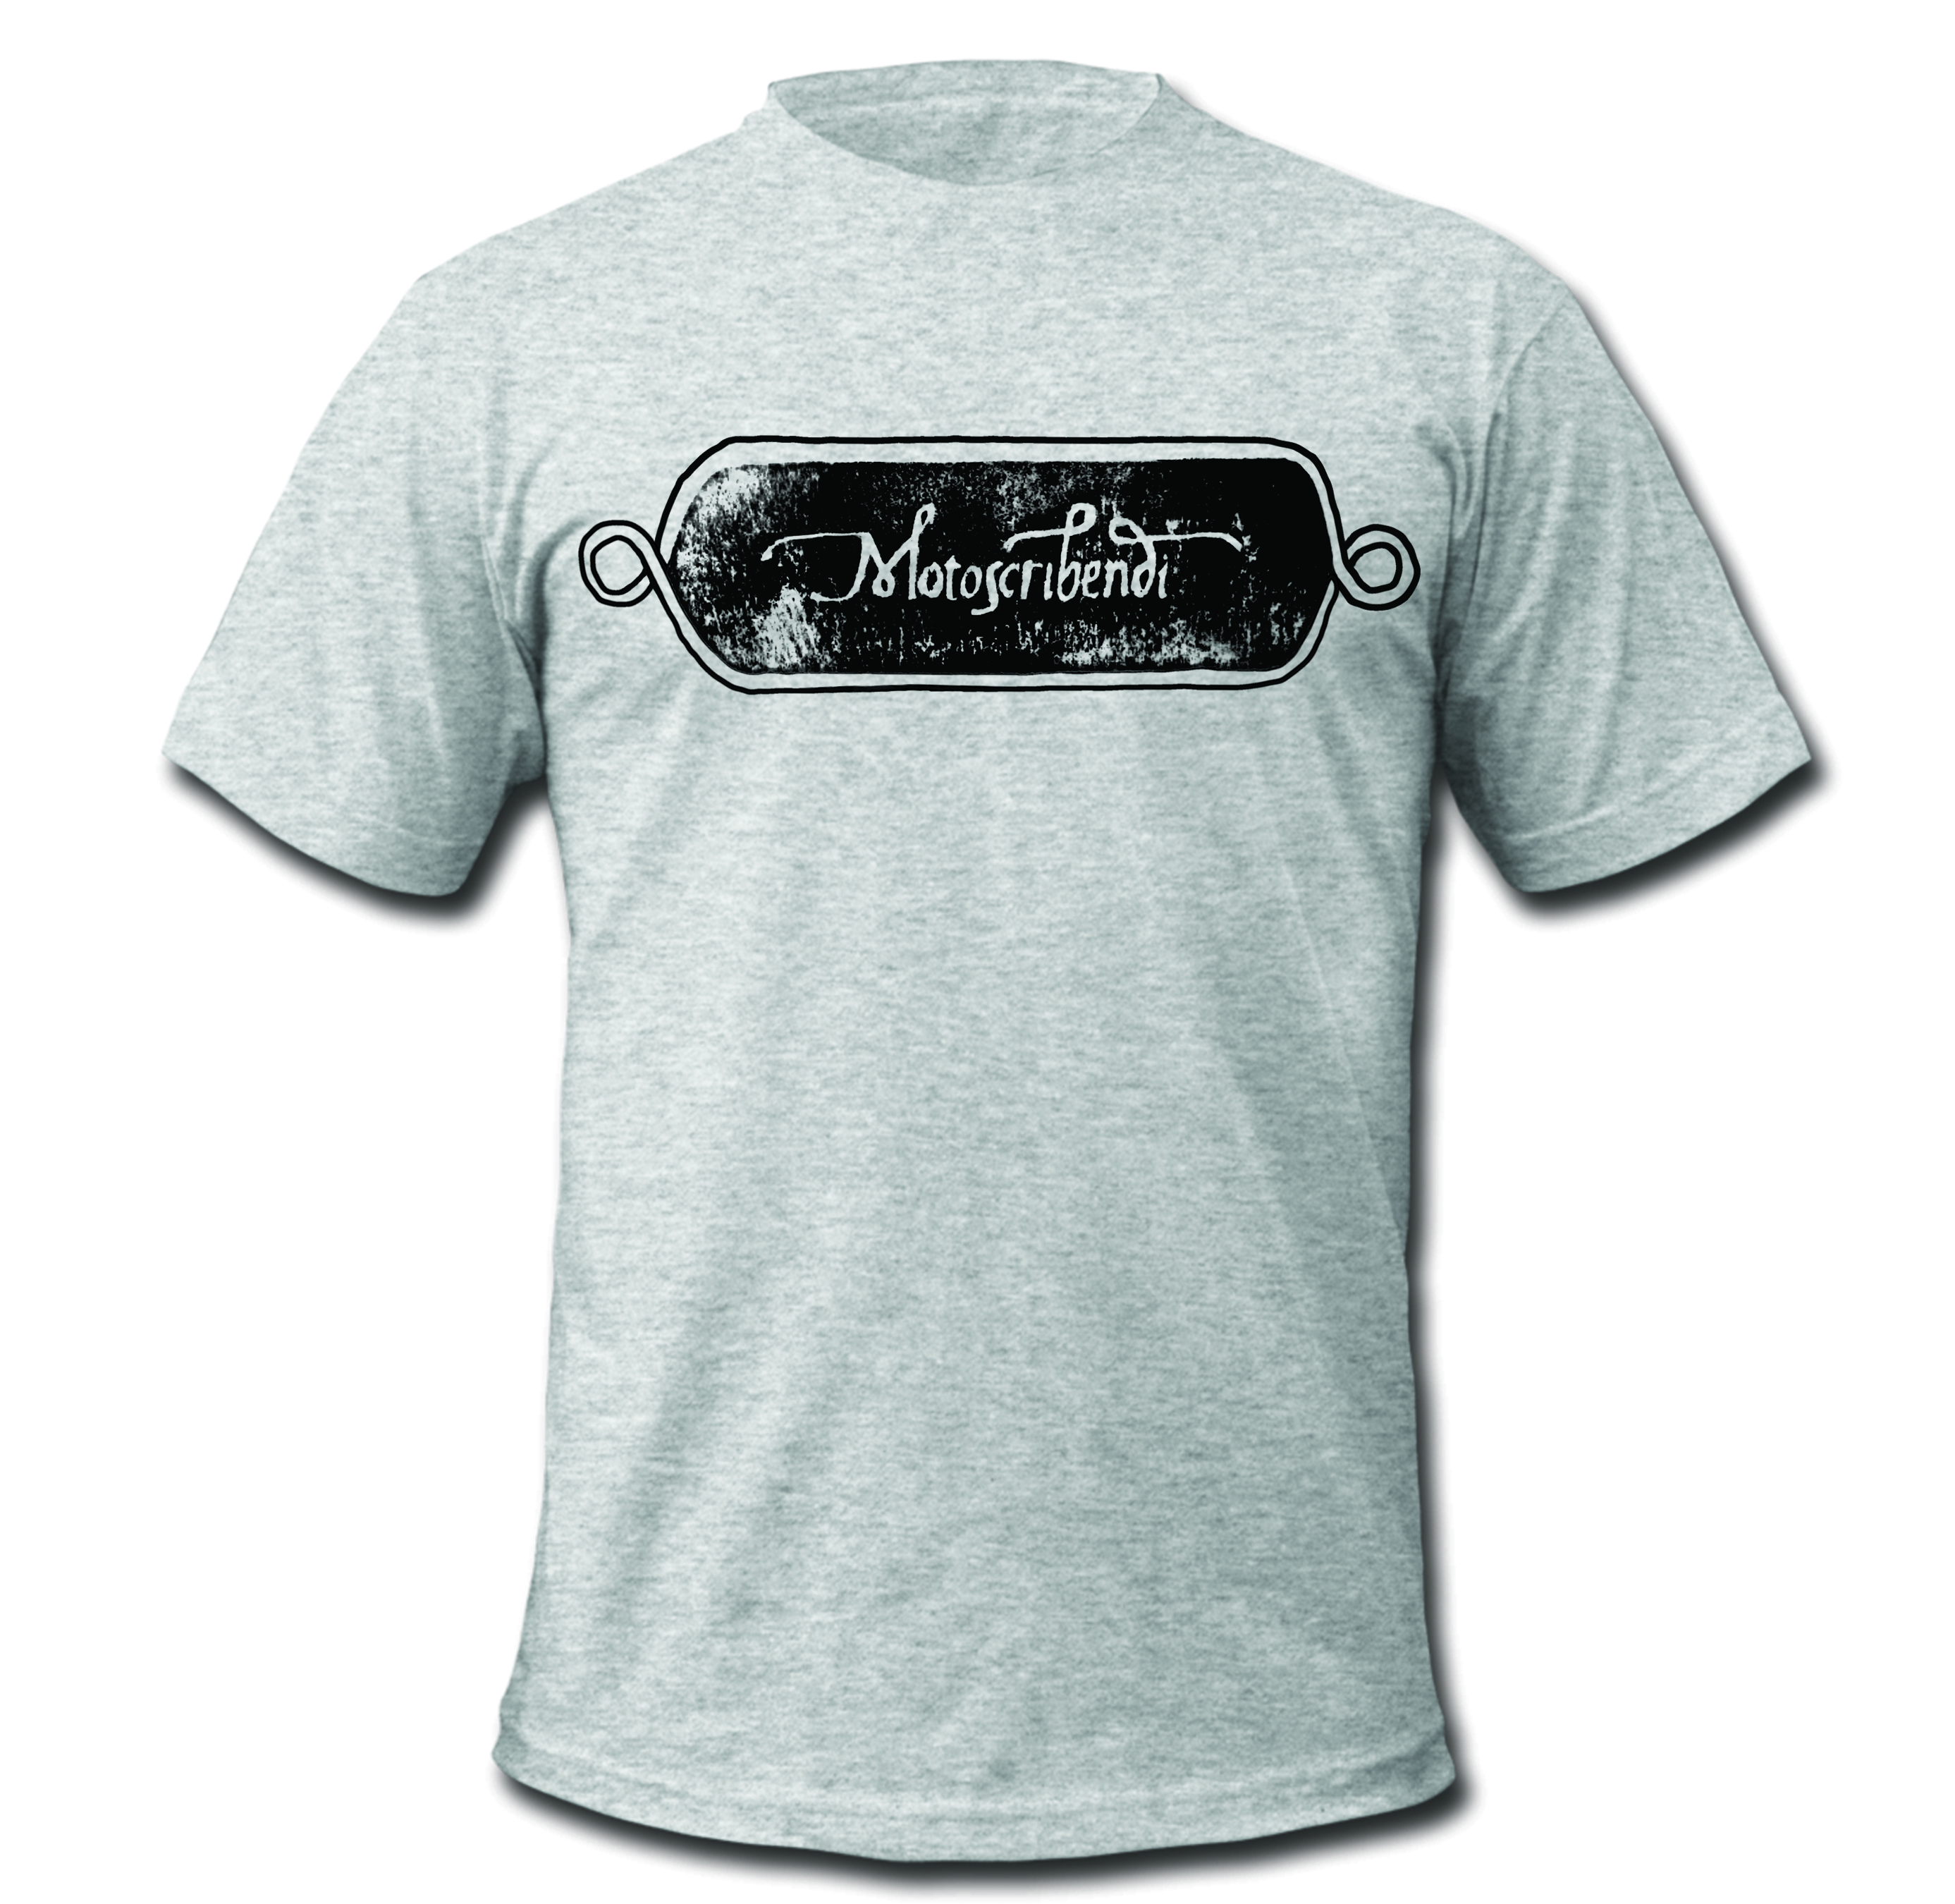 T-Shirt for Notary Perk on Indiegogo campaign